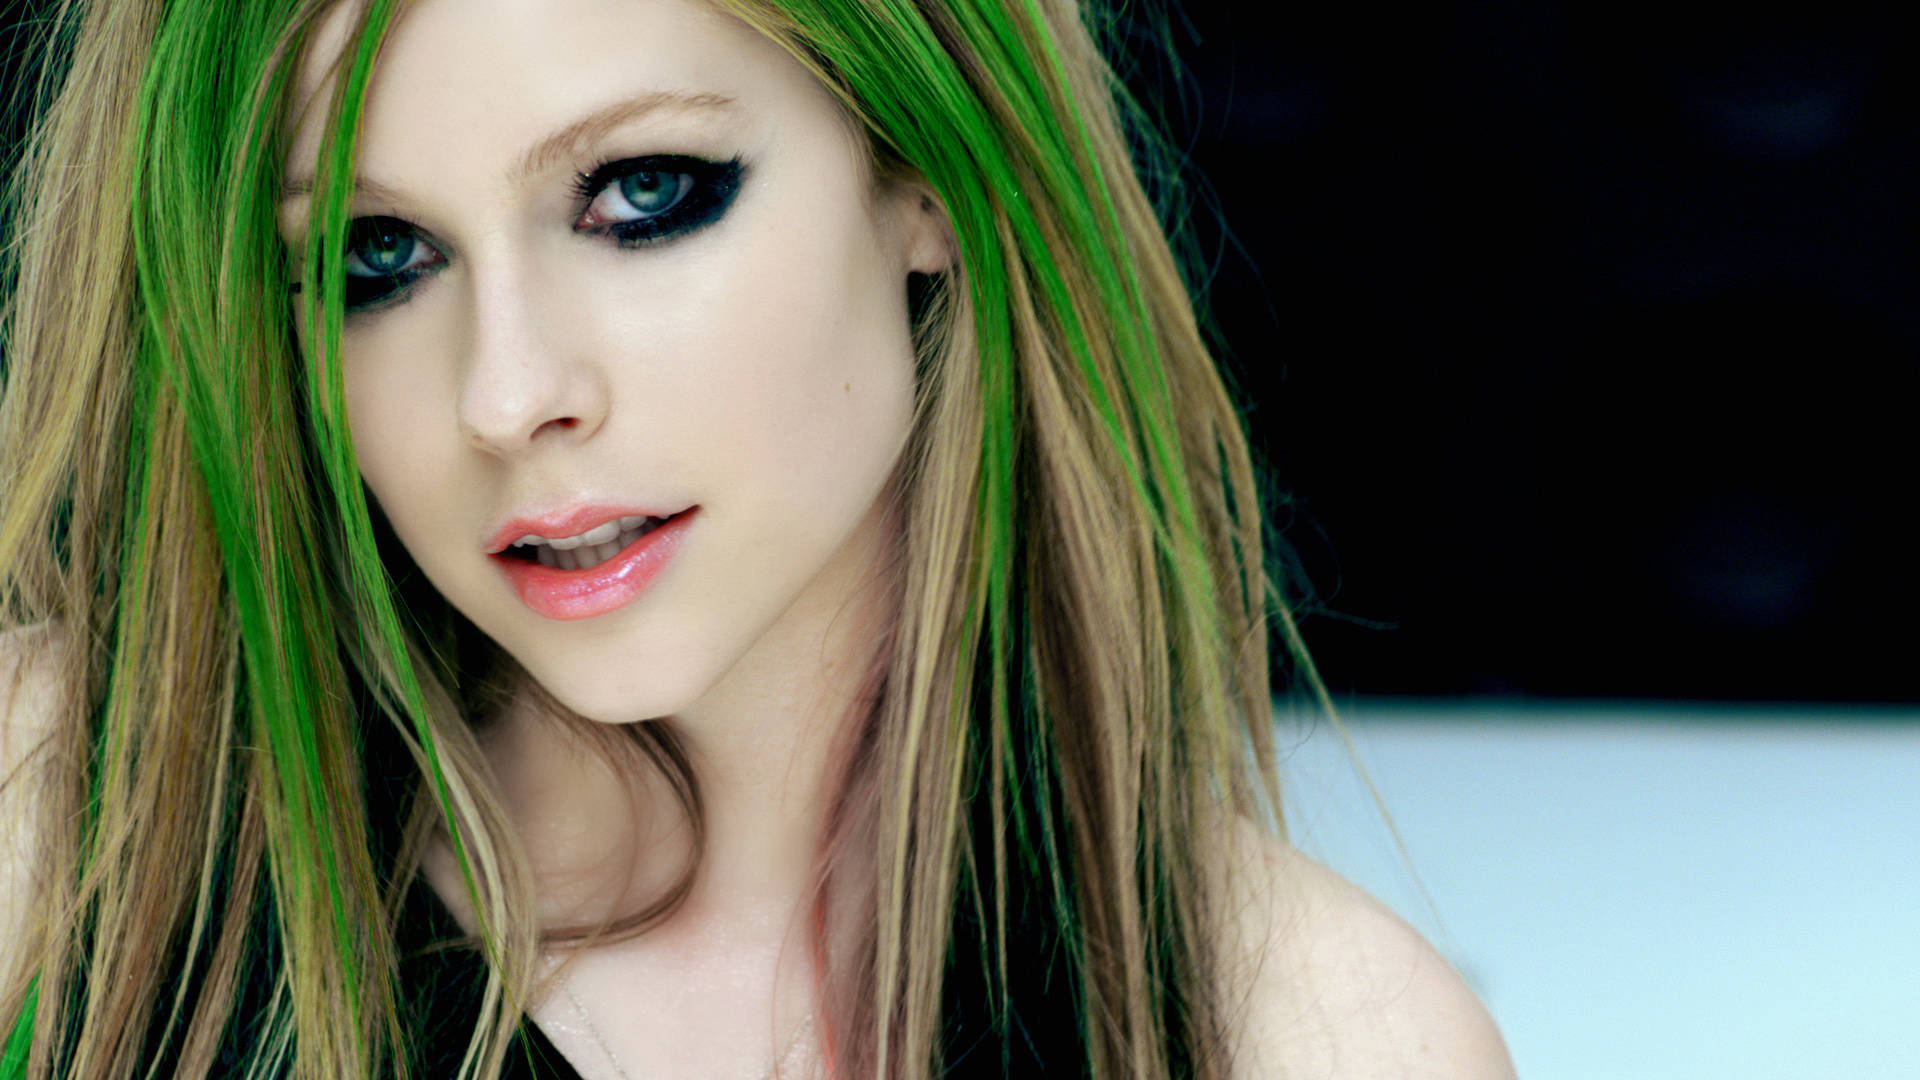 Avril Lavigne With Green Highlights Wallpaper